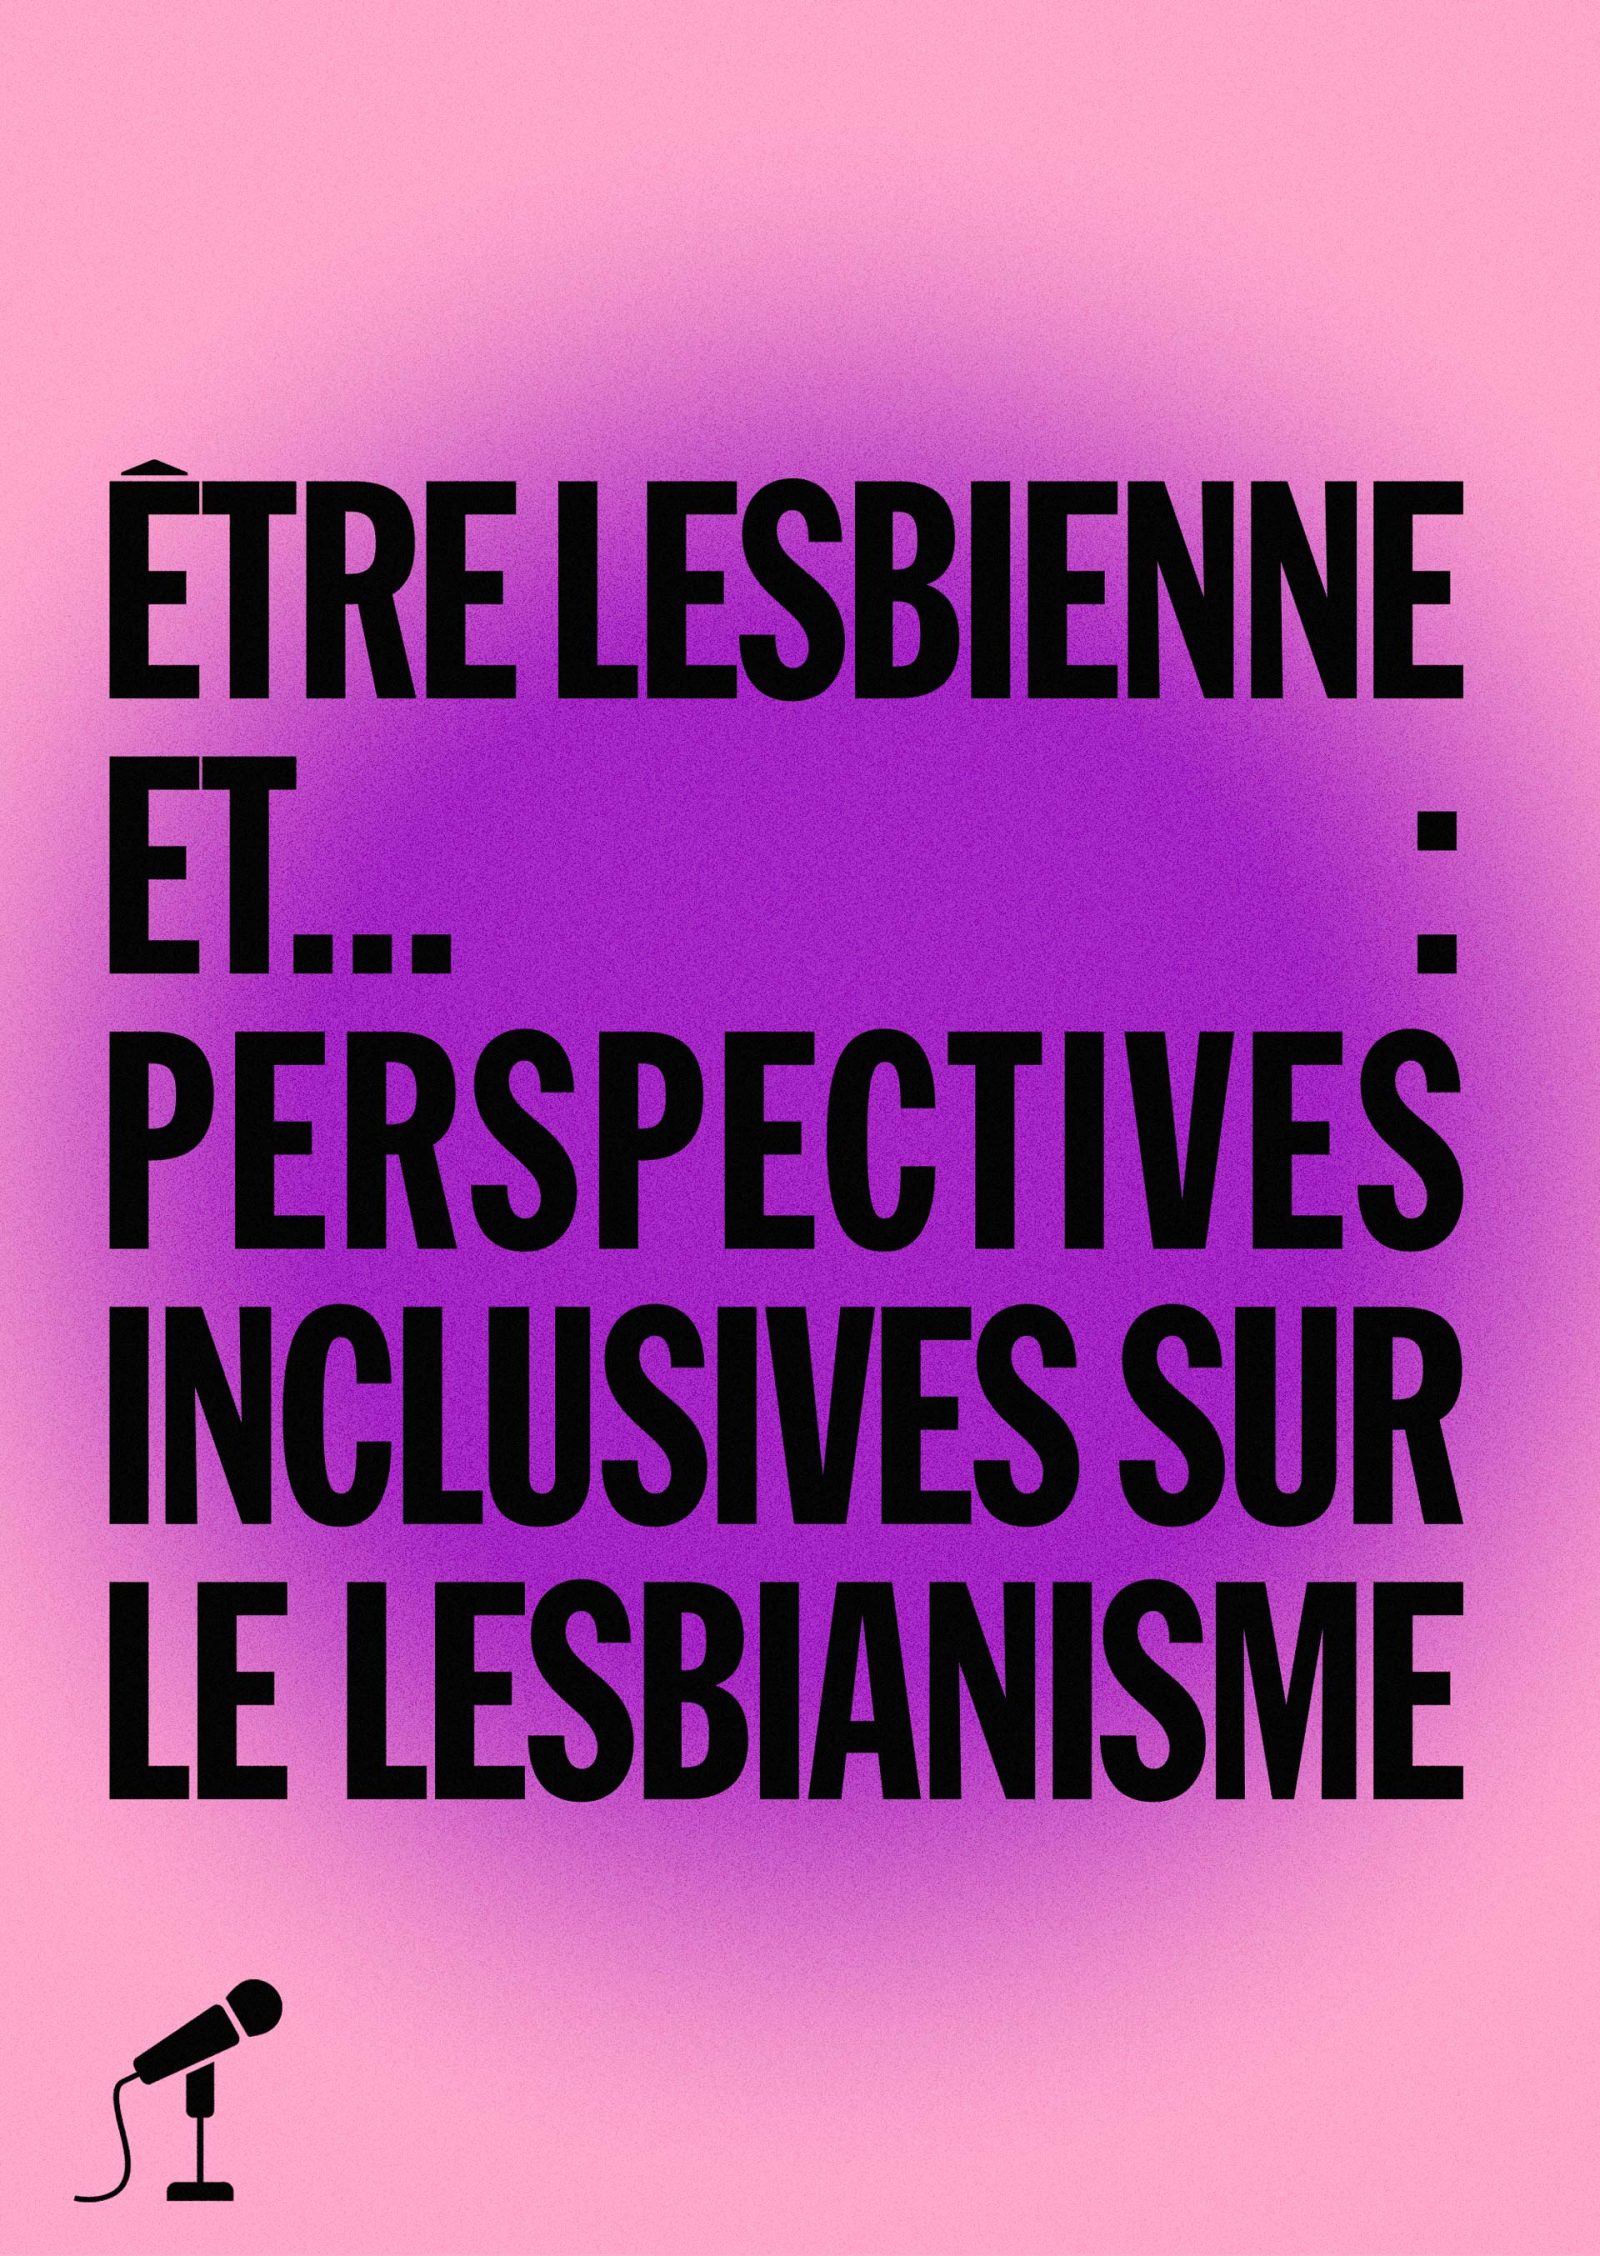 To Be a Lesbian and …: Inclusive Perspectives on Lesbianism | IN Magazine